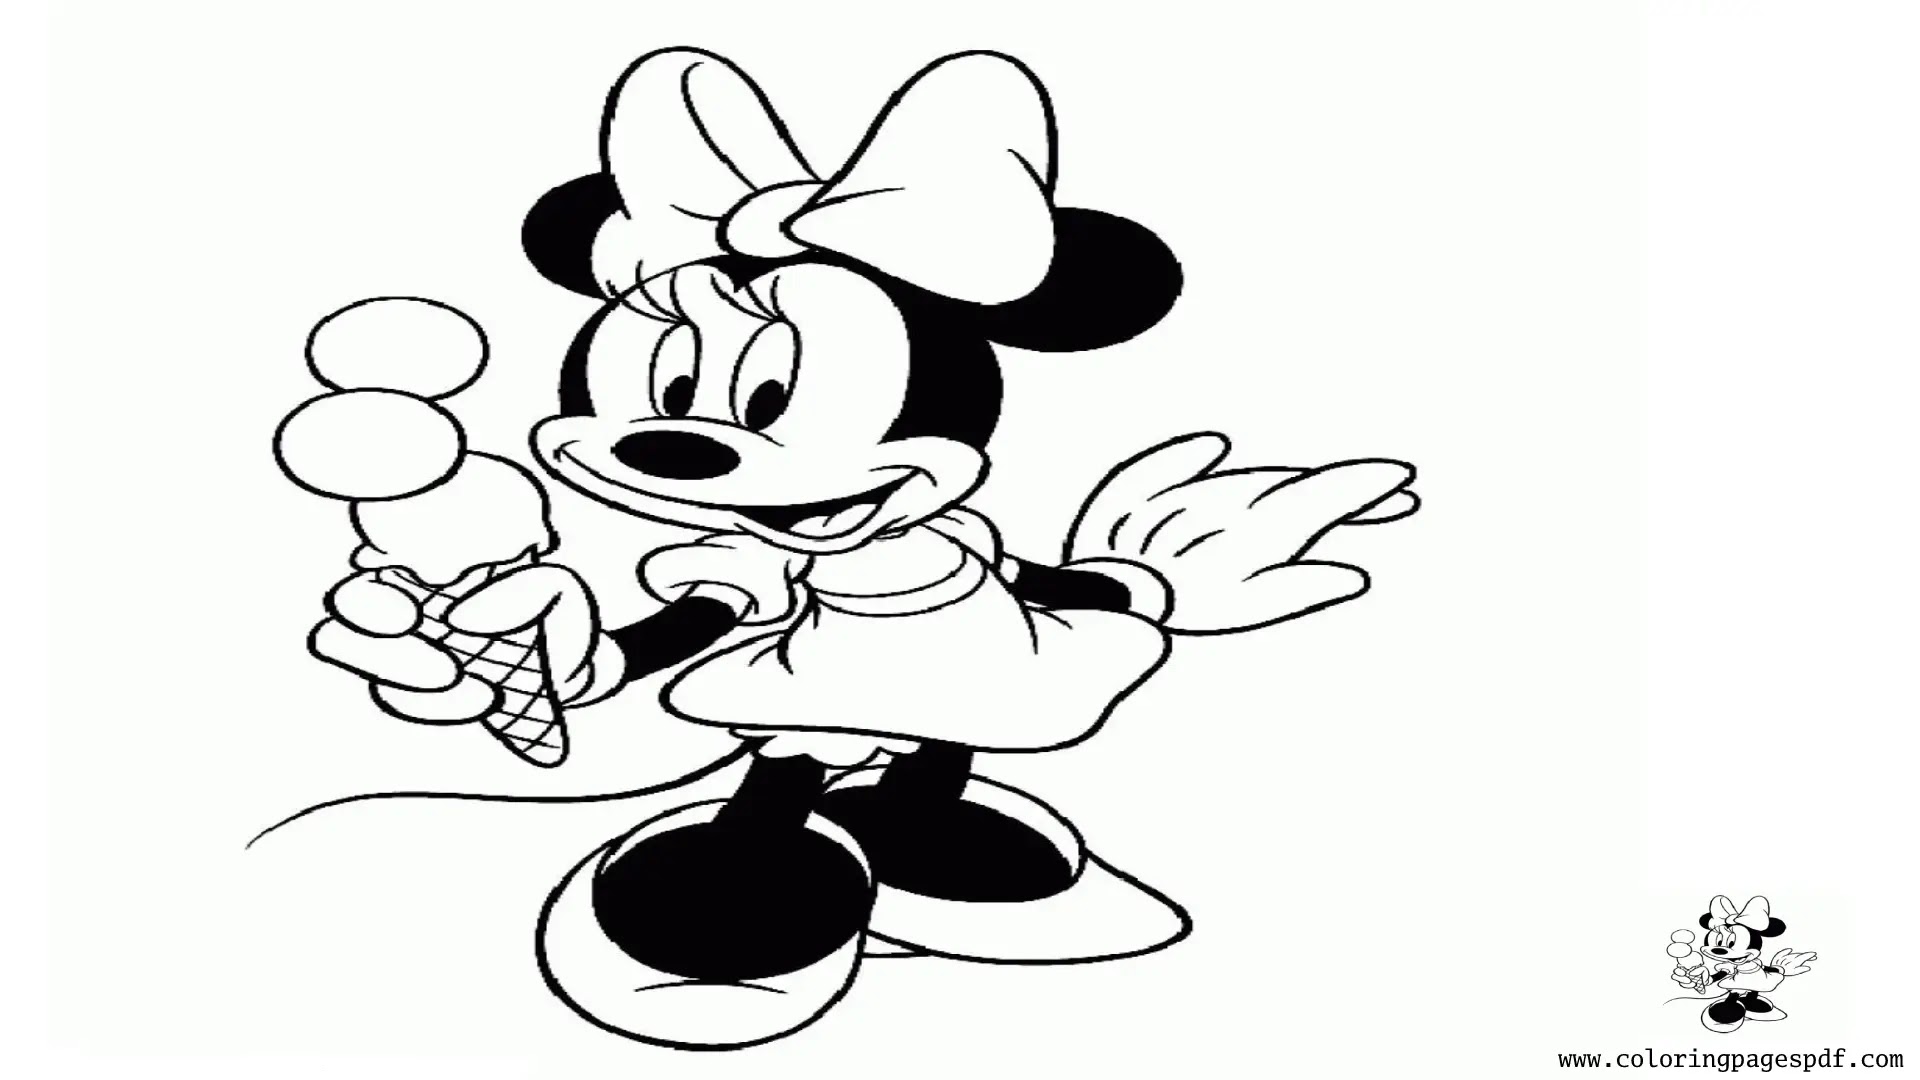 Coloring Pages Of Minnie Mouse Eating Ice Cream